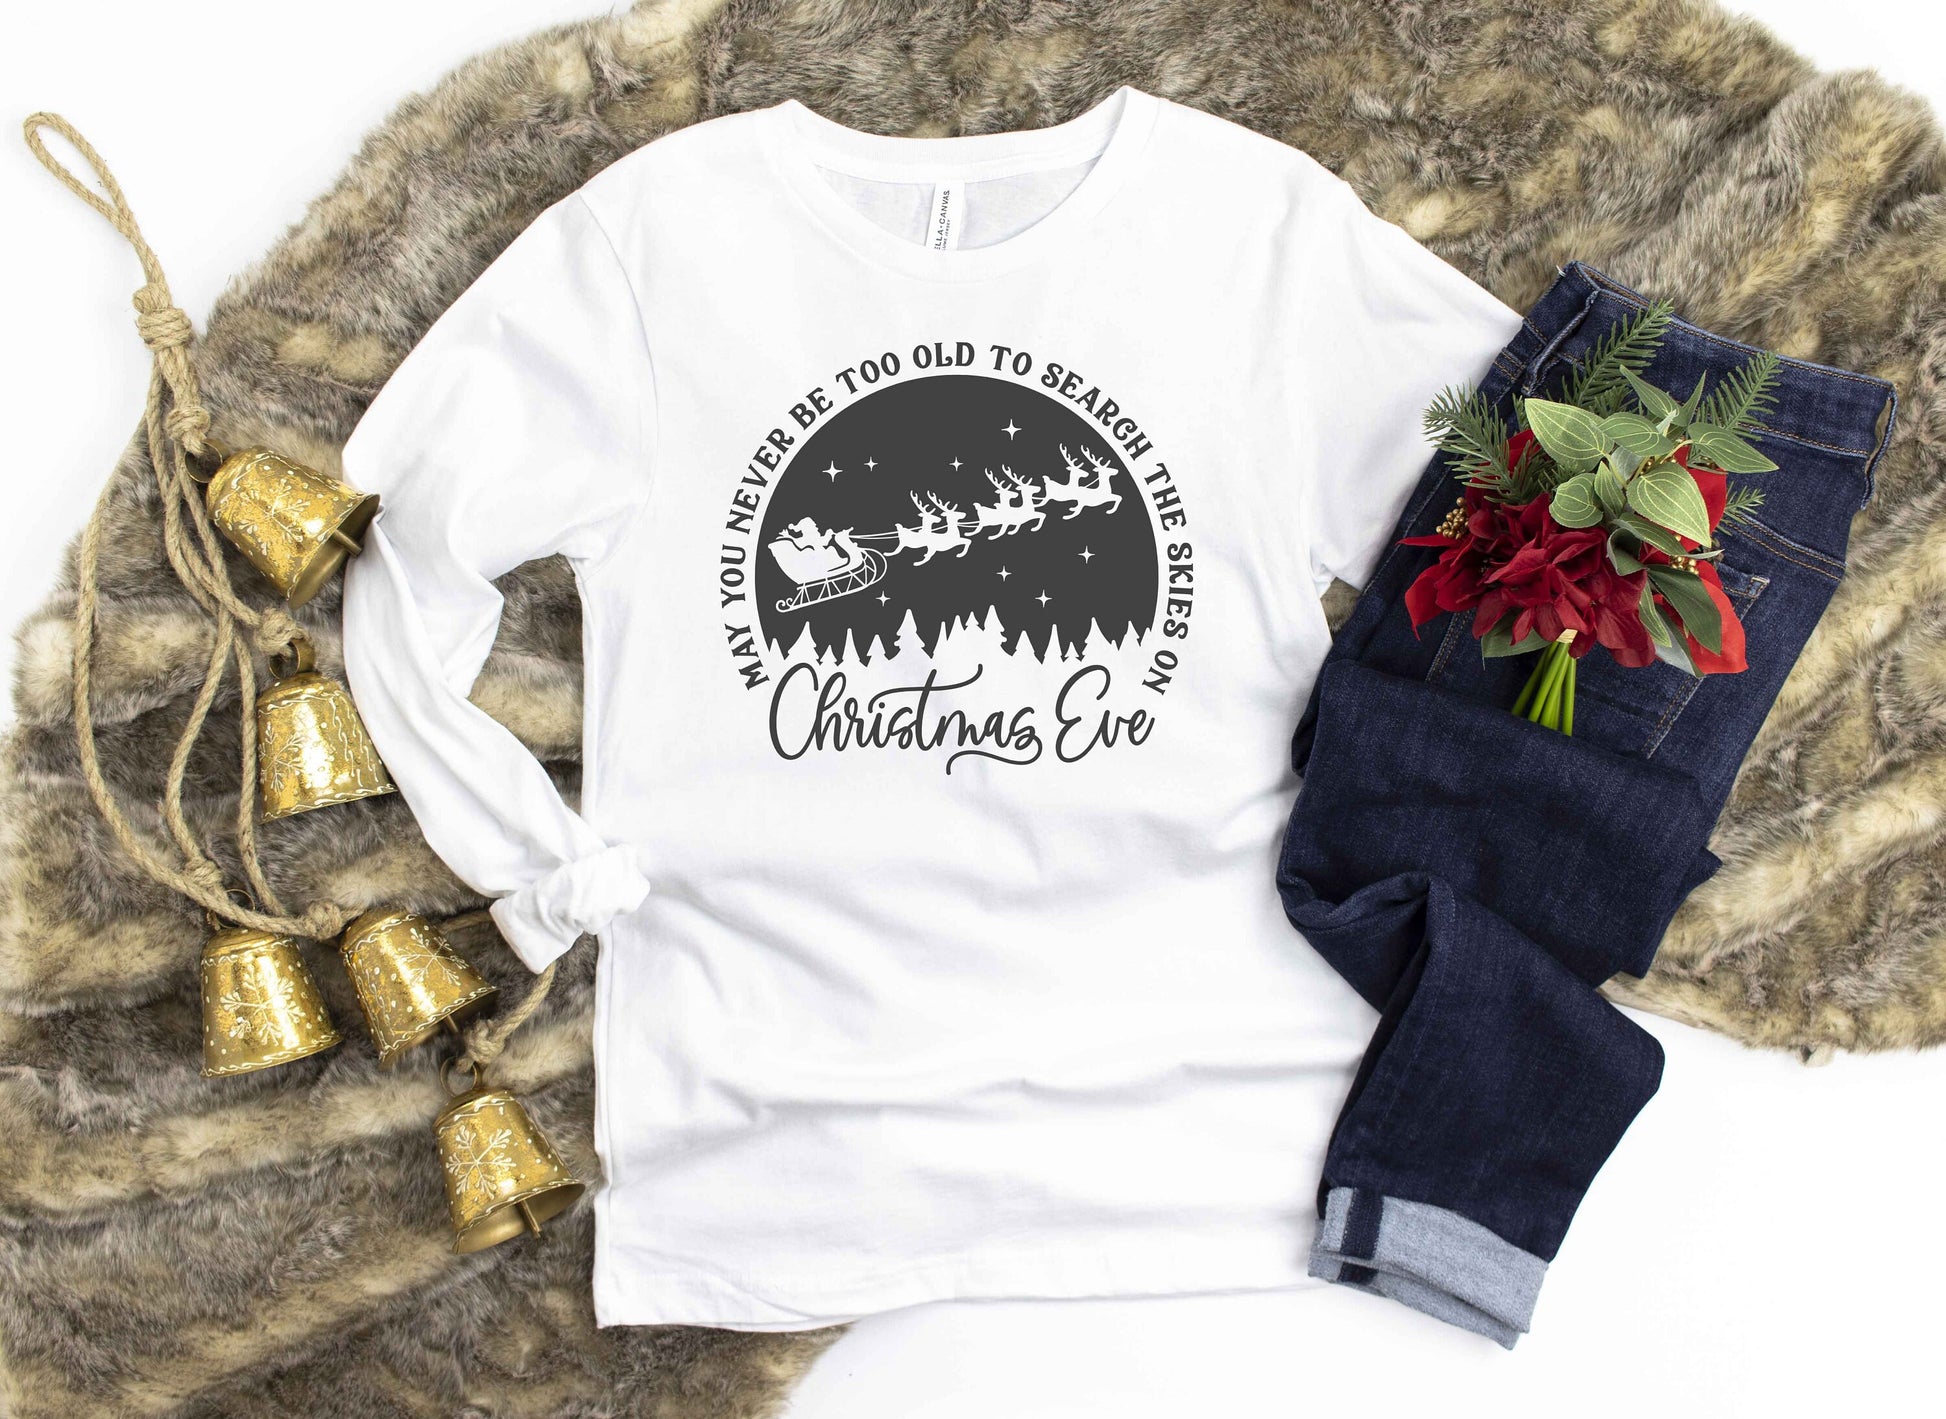 May You Never Be Too Old to Search the Skies on Christmas Eve unisex long sleeve t-shirt - christmas shirt - winter t-shirt